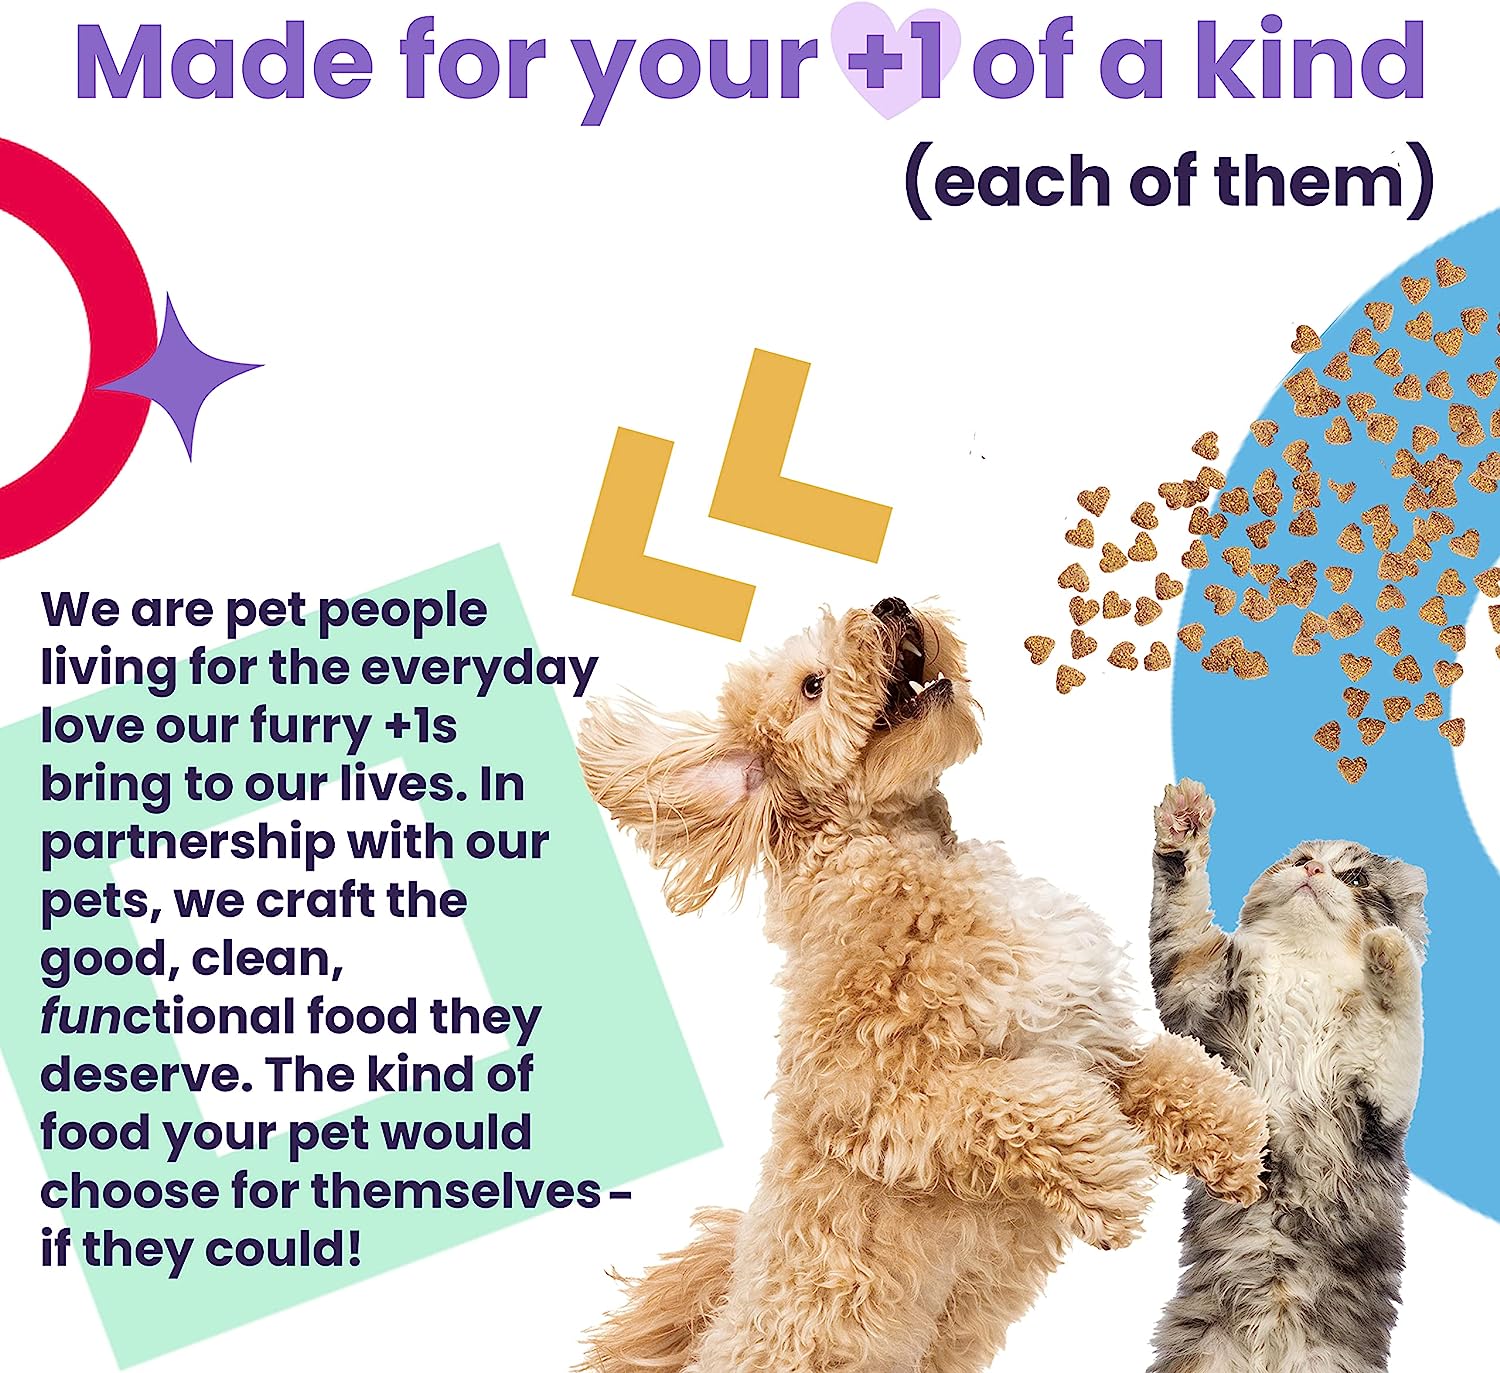 I and love and you Naked Essentials Dry Dog Food - Lamb + Bison - High Protein, Real Meat, No Fillers, Prebiotics + Probiotics, 11lb Bag : Pet Supplies